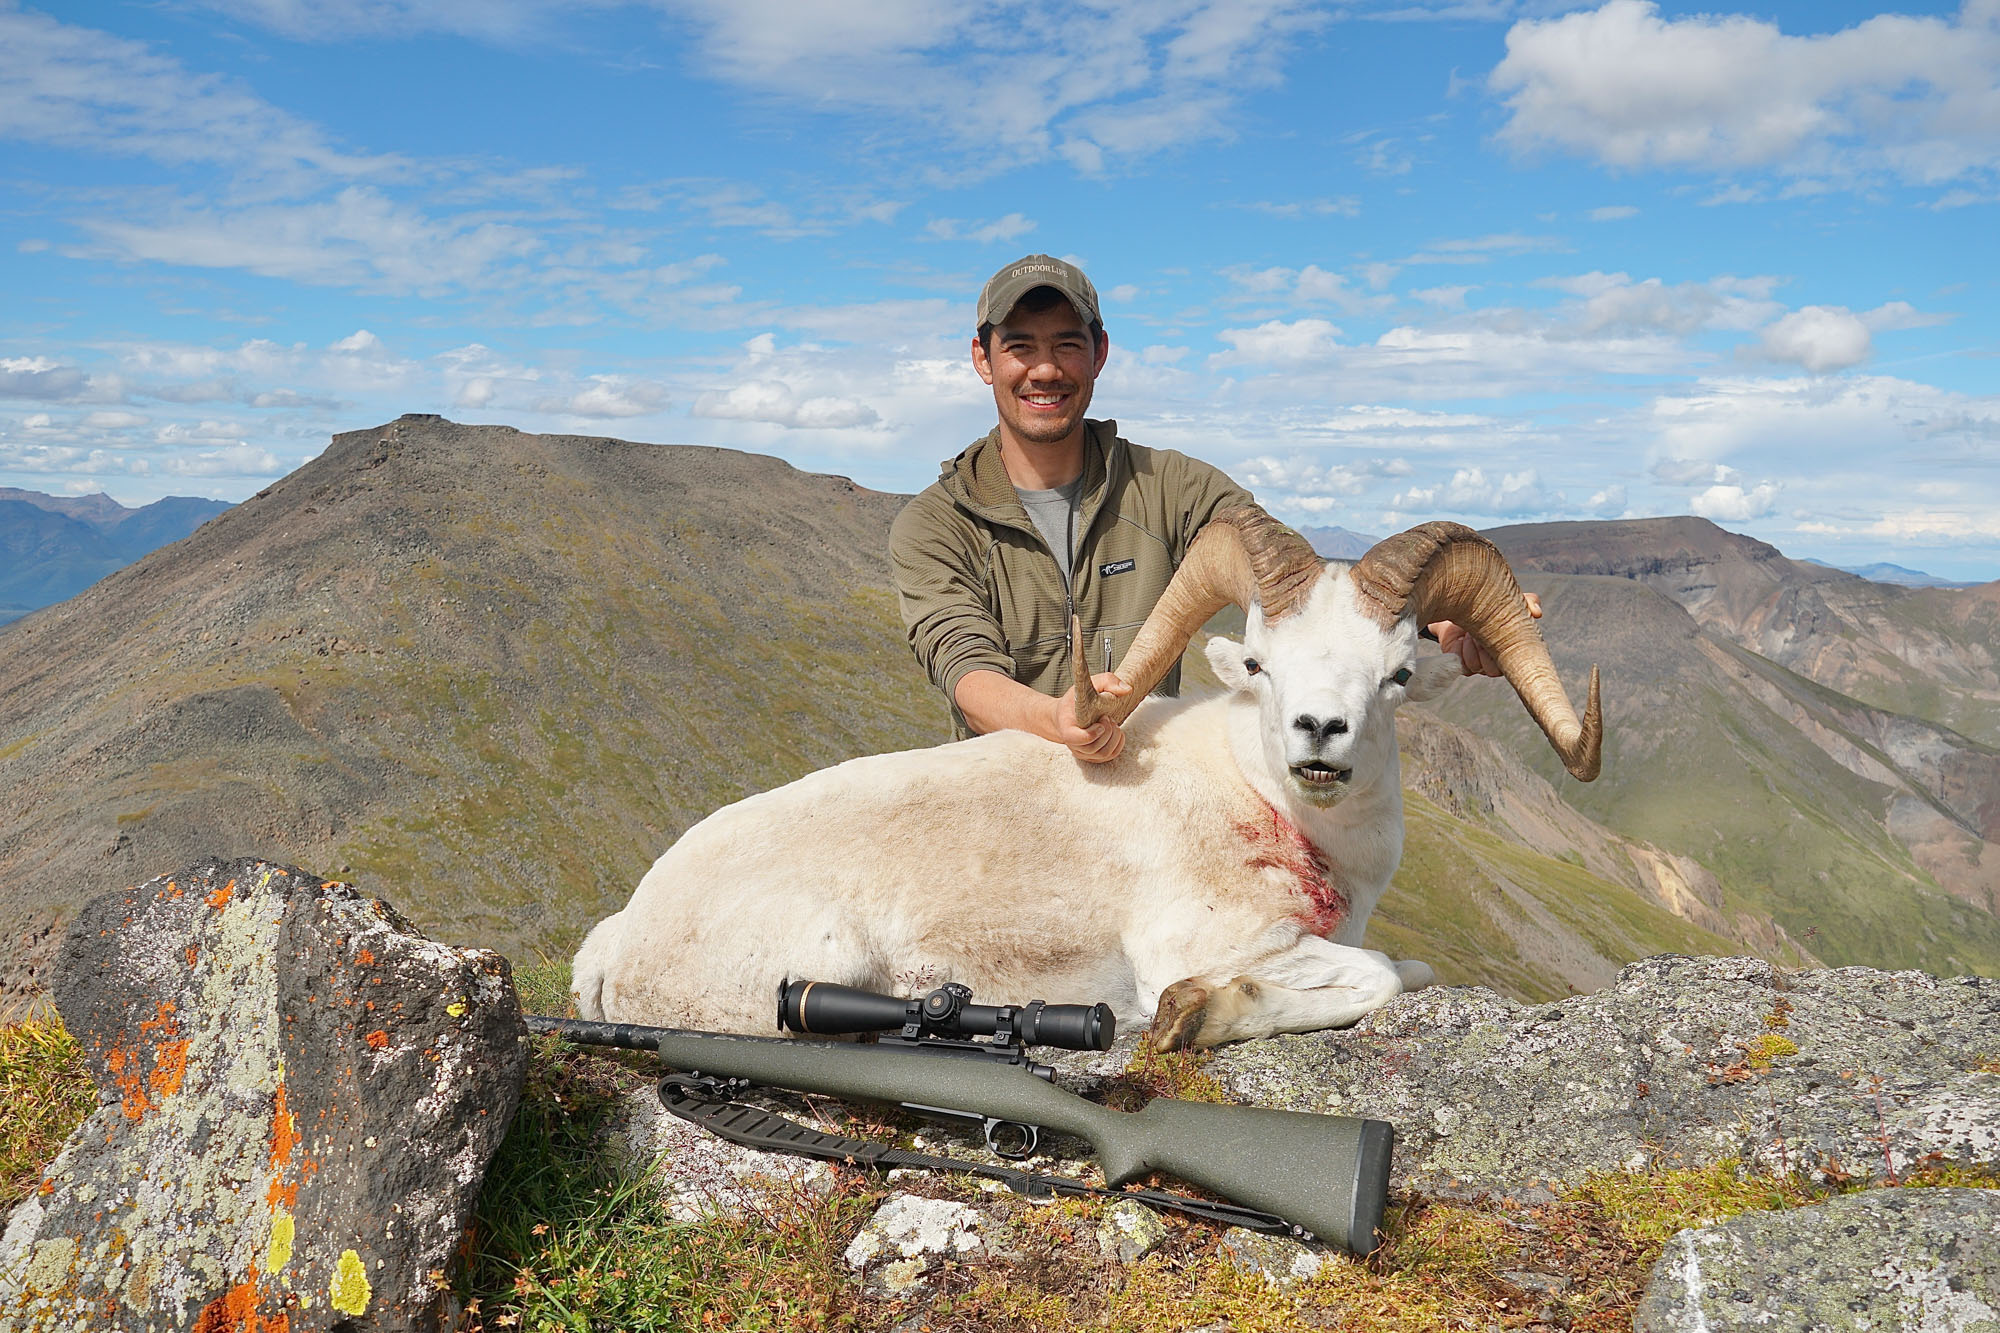 Alex Robinson with a 6.5 PRC rifle from Proof Research on a Dall Sheep hunt